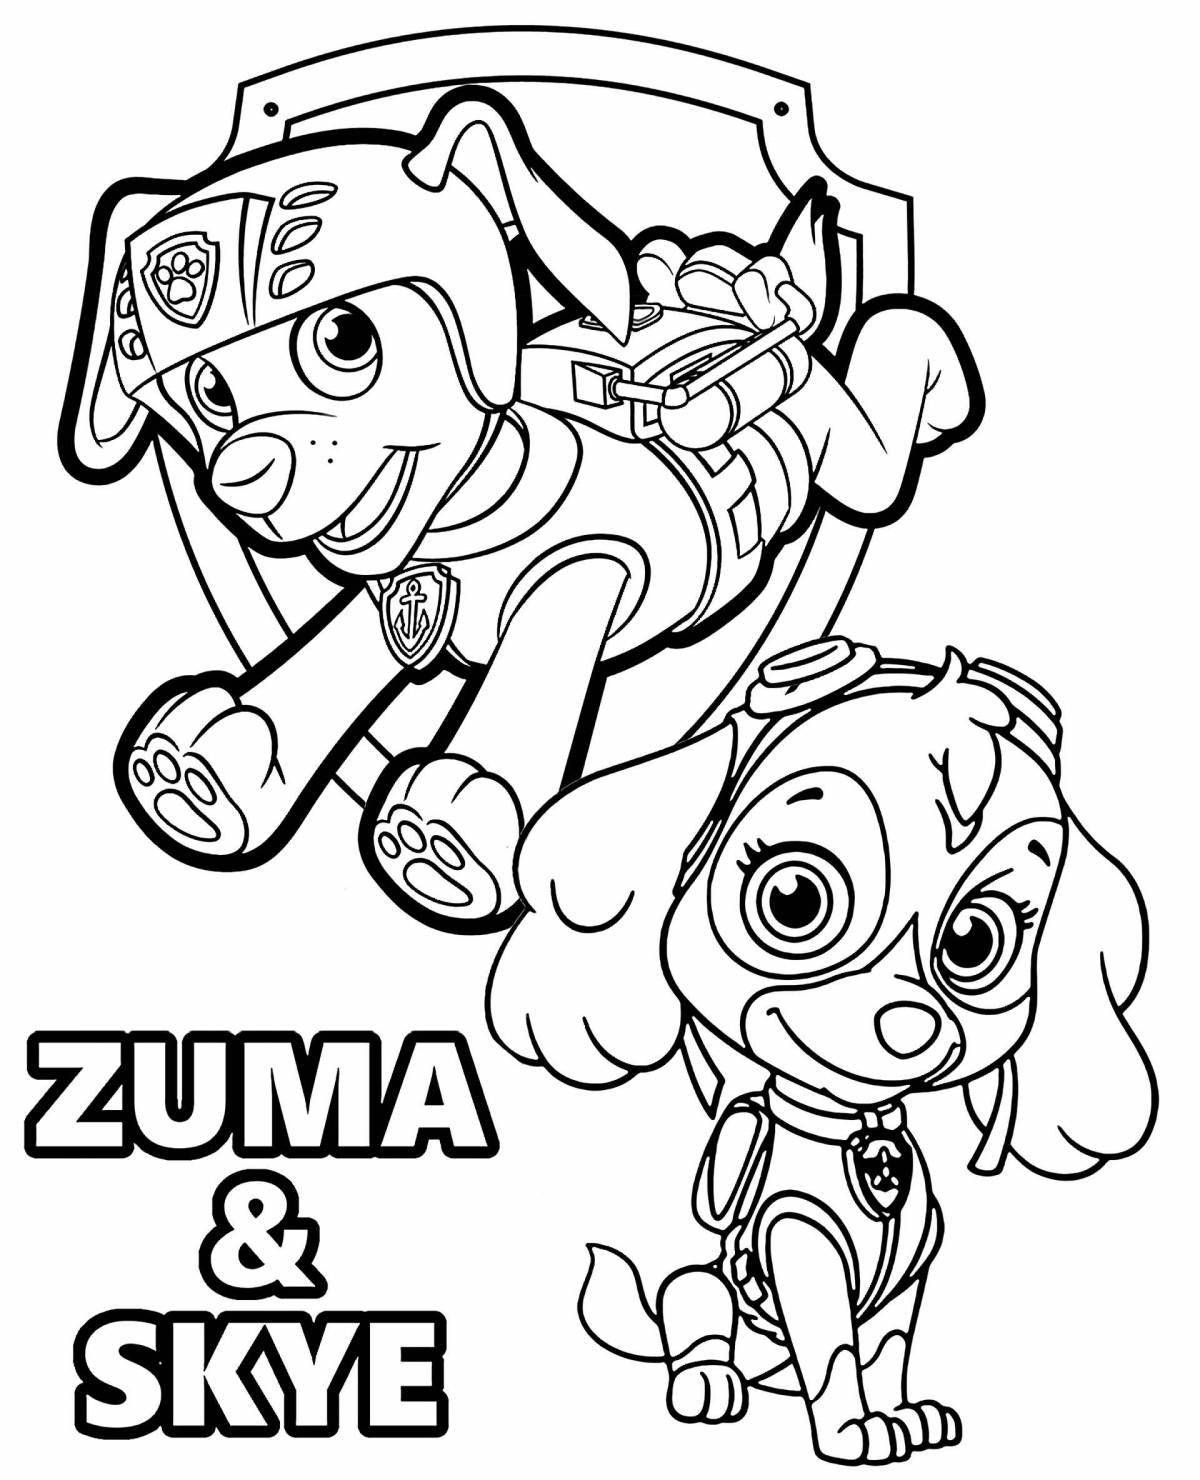 Intriguing Paw Patrol Coloring Page